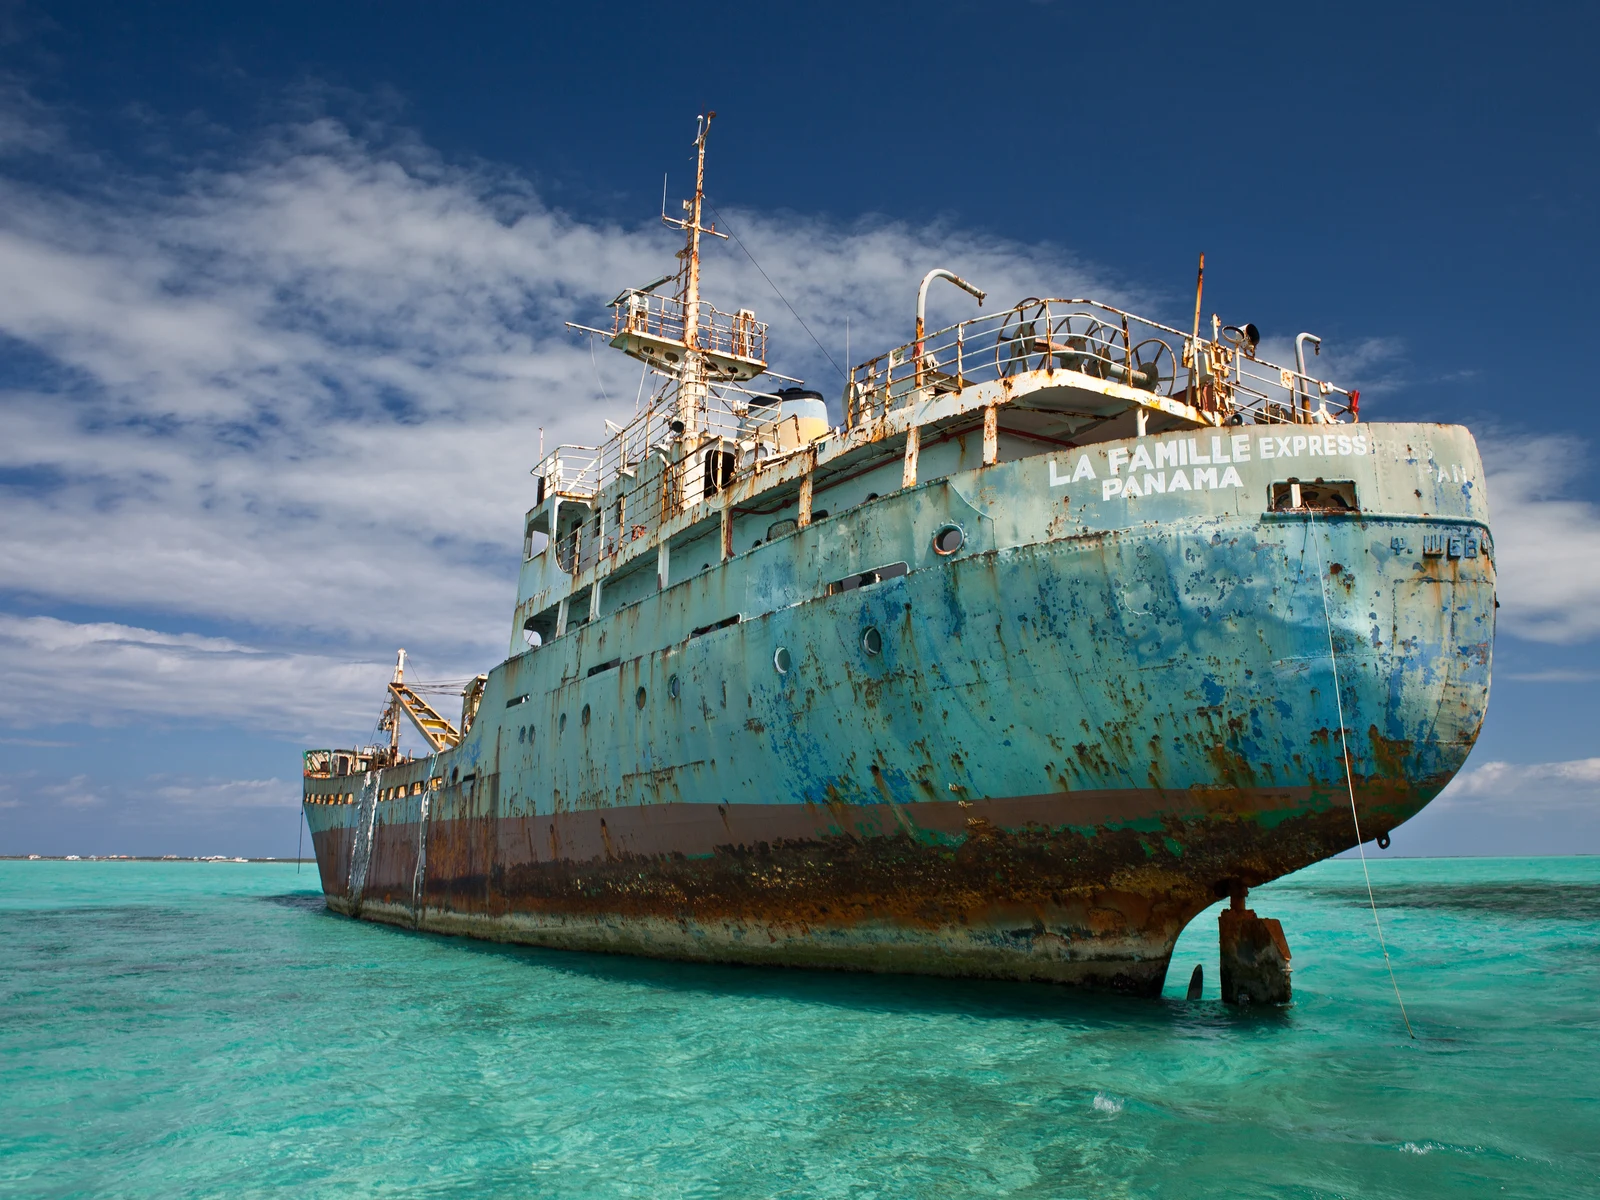 Old cargo ship run aground in the shallow teal water during the cheapest time to visit Turks and Caicos